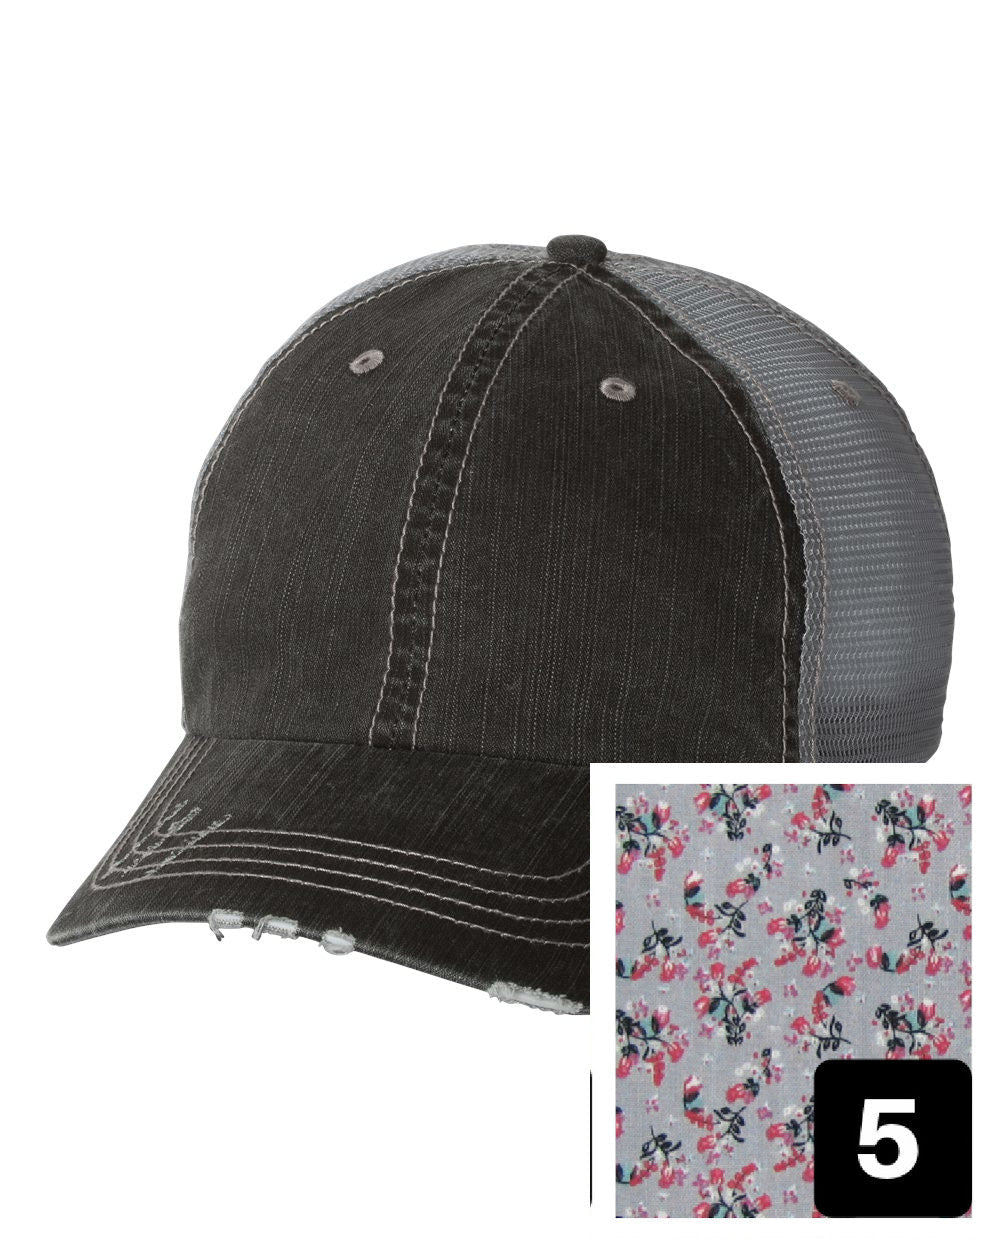 gray distressed trucker hat with purple and pink floral fabric state of Minnesota